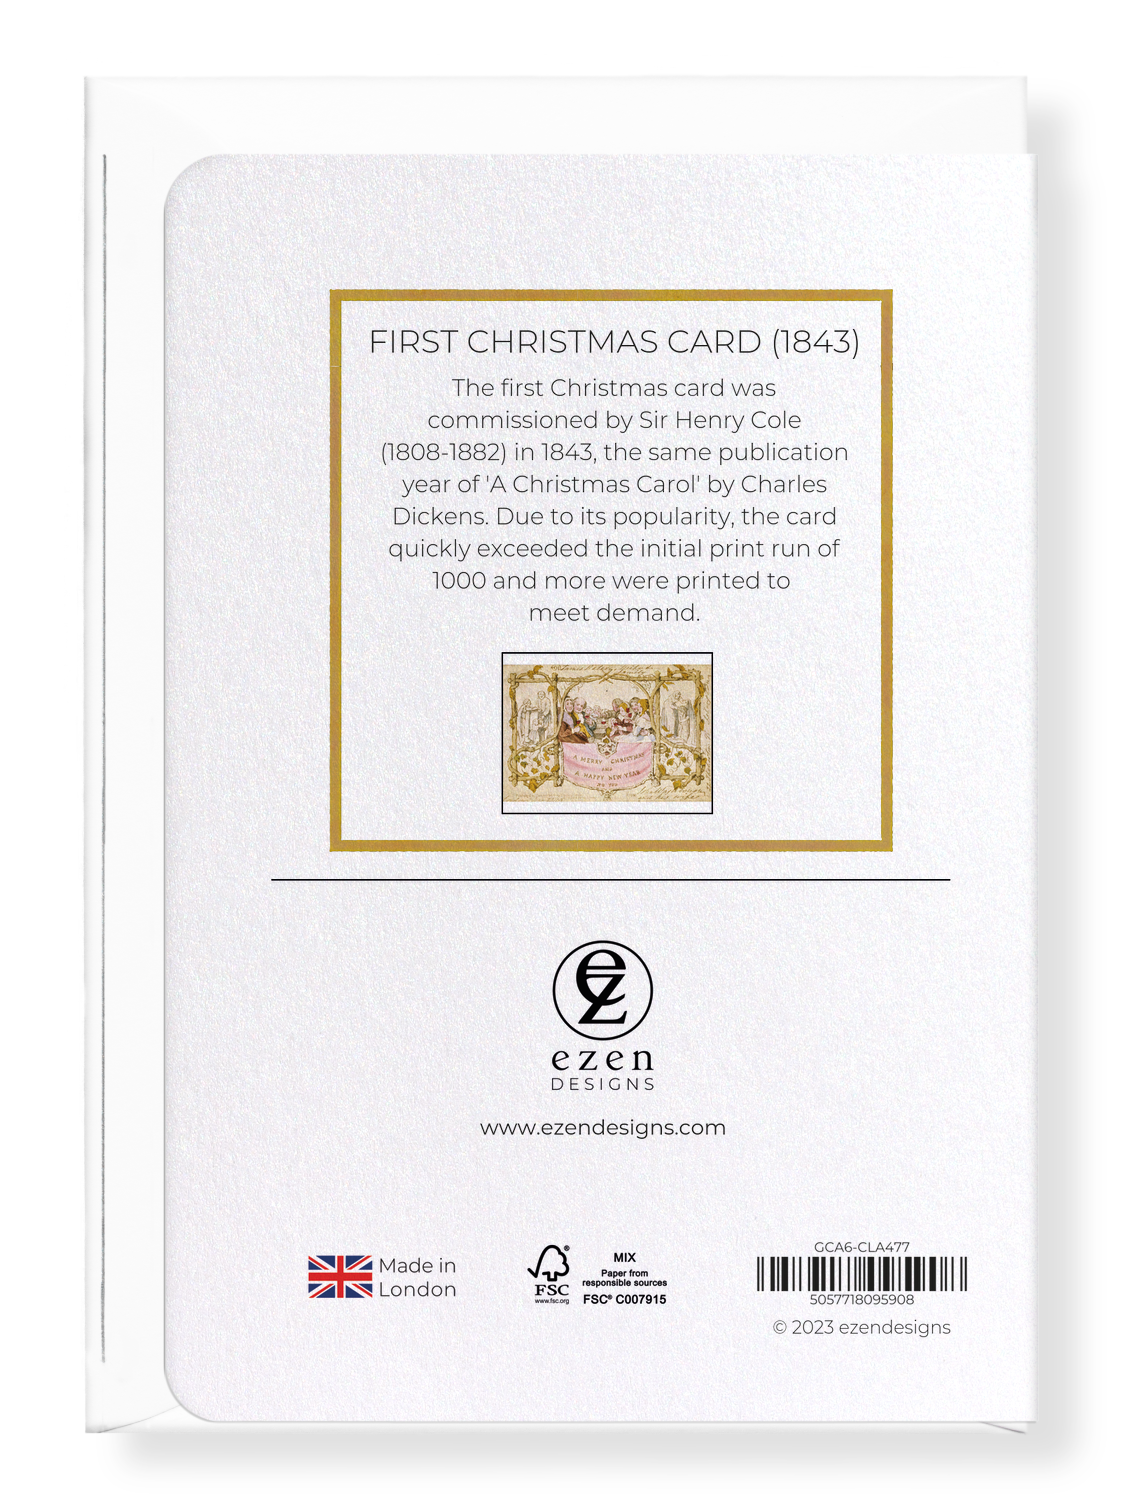 Ezen Designs - First Christmas Card (1843) - Greeting Card - Back